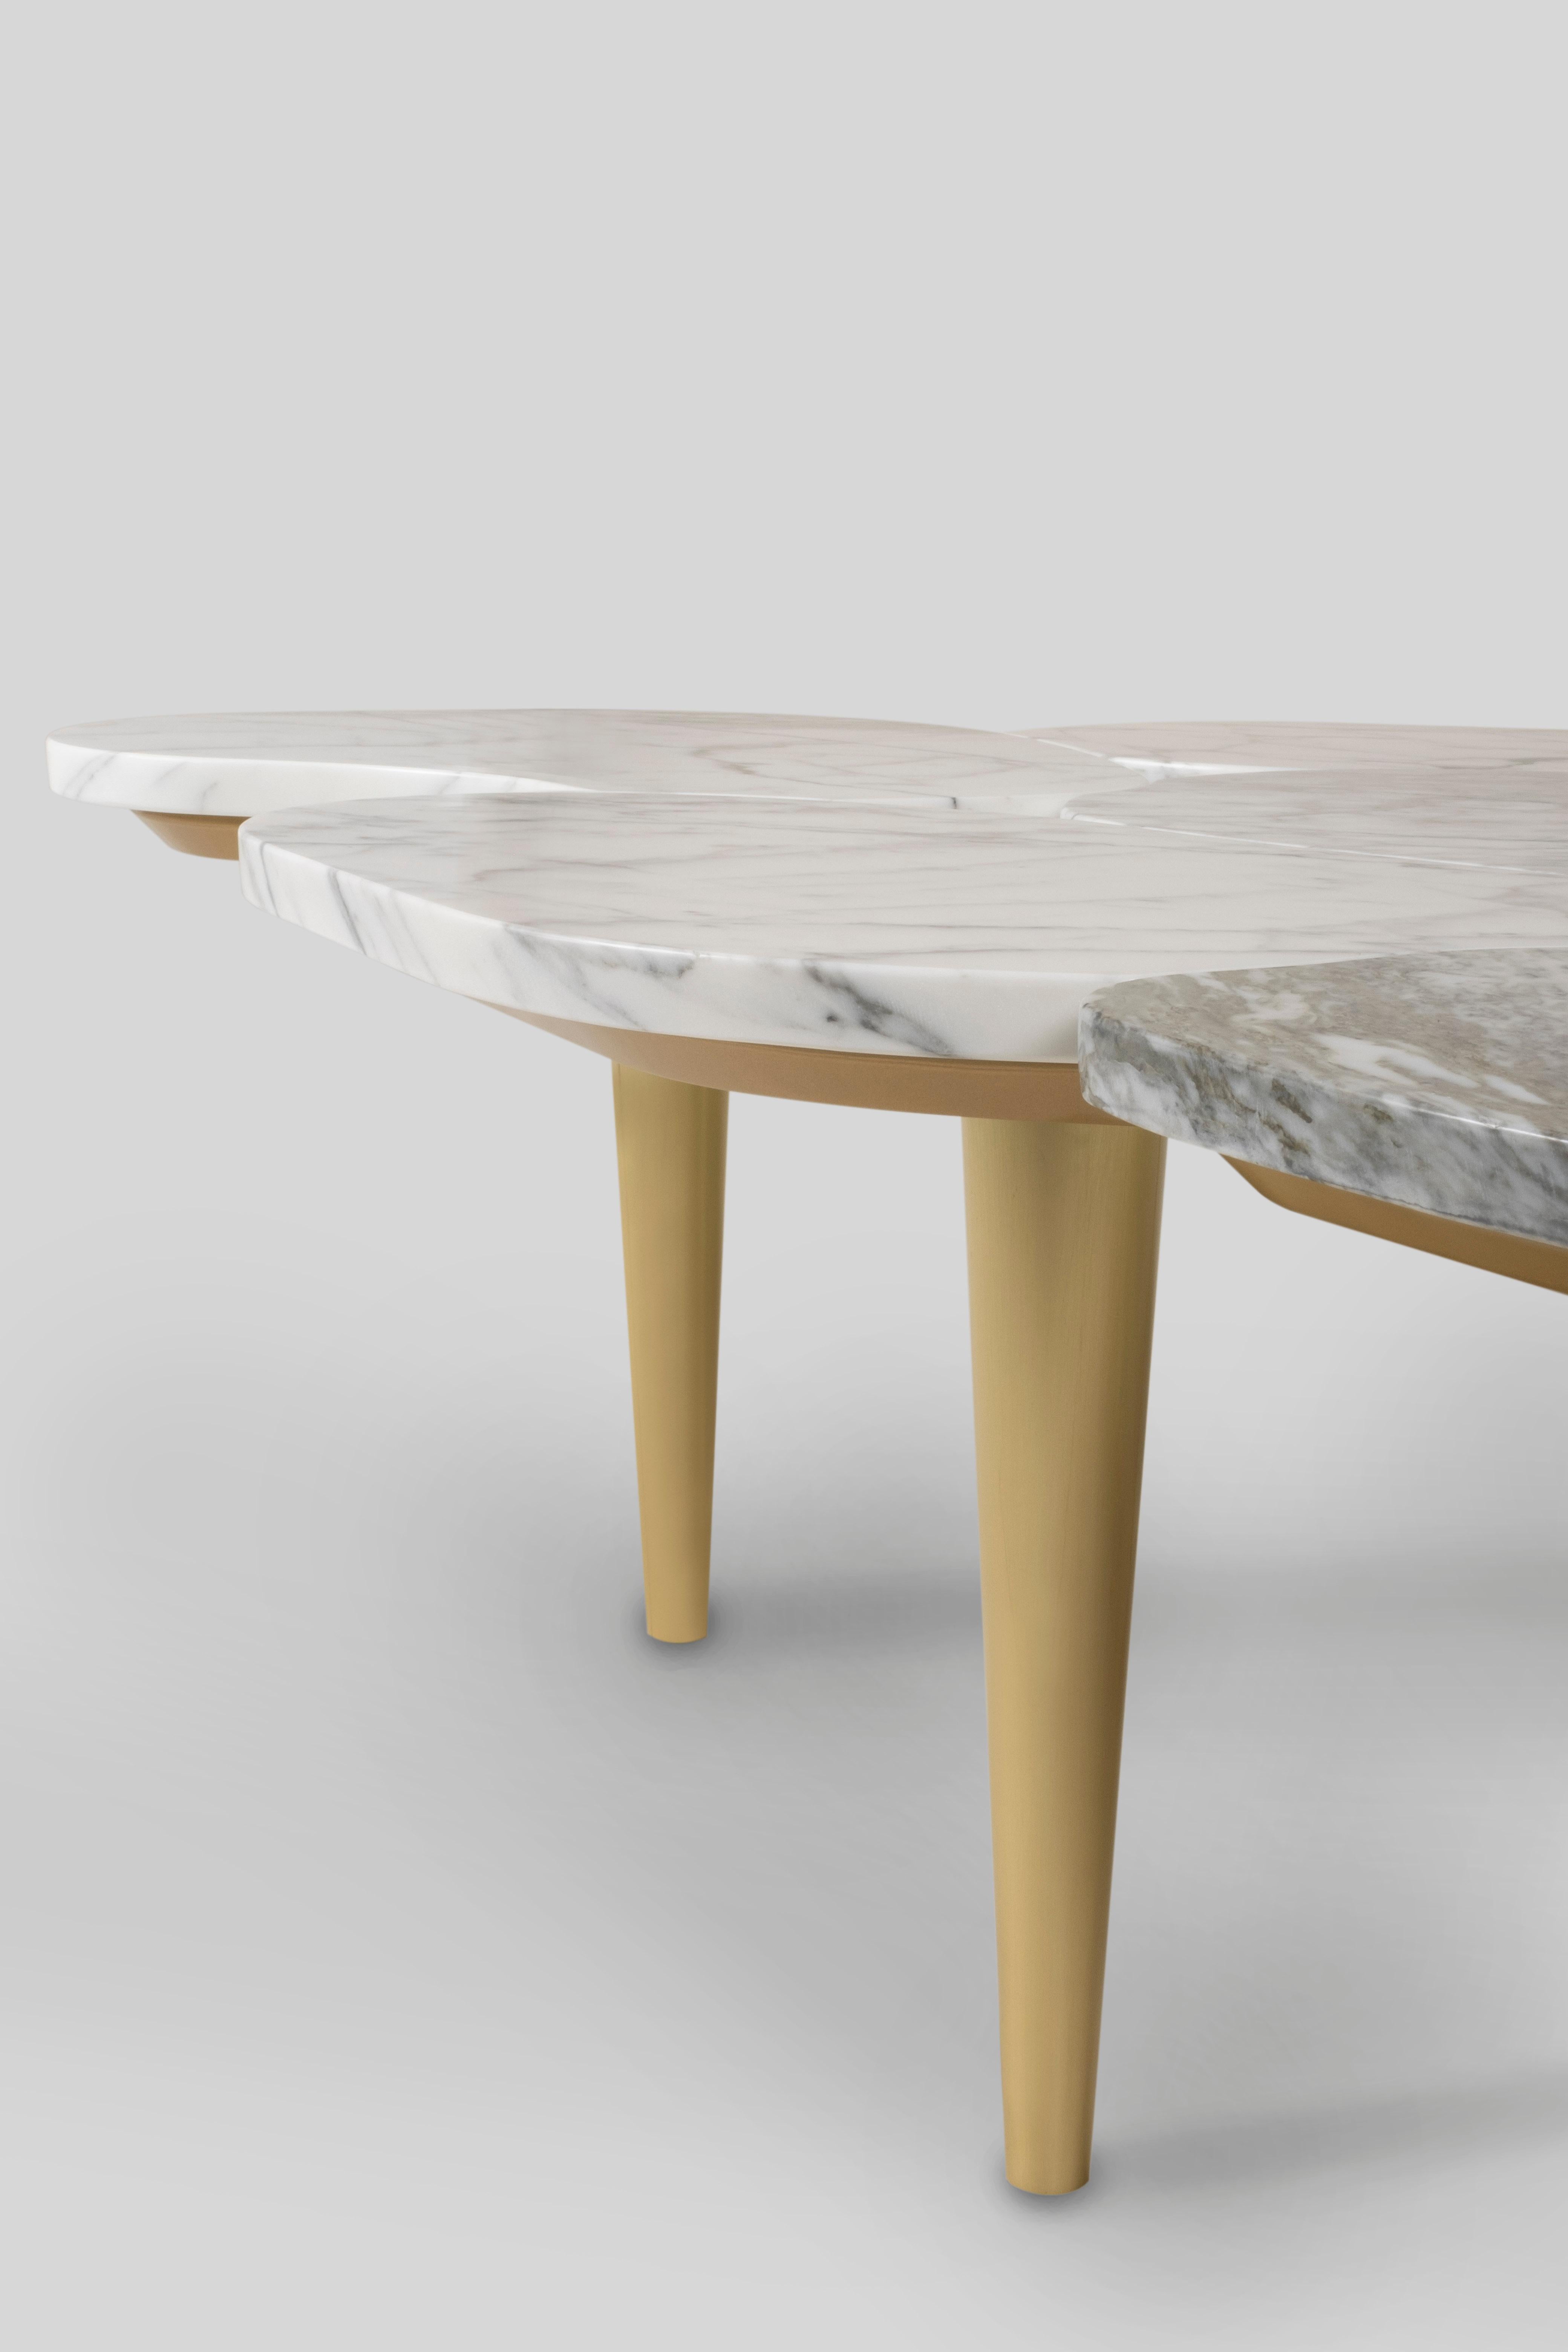 Infinity Coffee Table, Modern Collection, Handcrafted in Portugal - Europe by GF Modern.

The Infinity marble coffee table captures the passage of time in an infinite gaze. Featuring a petal-shaped top in Carrara marble, Infinity unveils a flowing